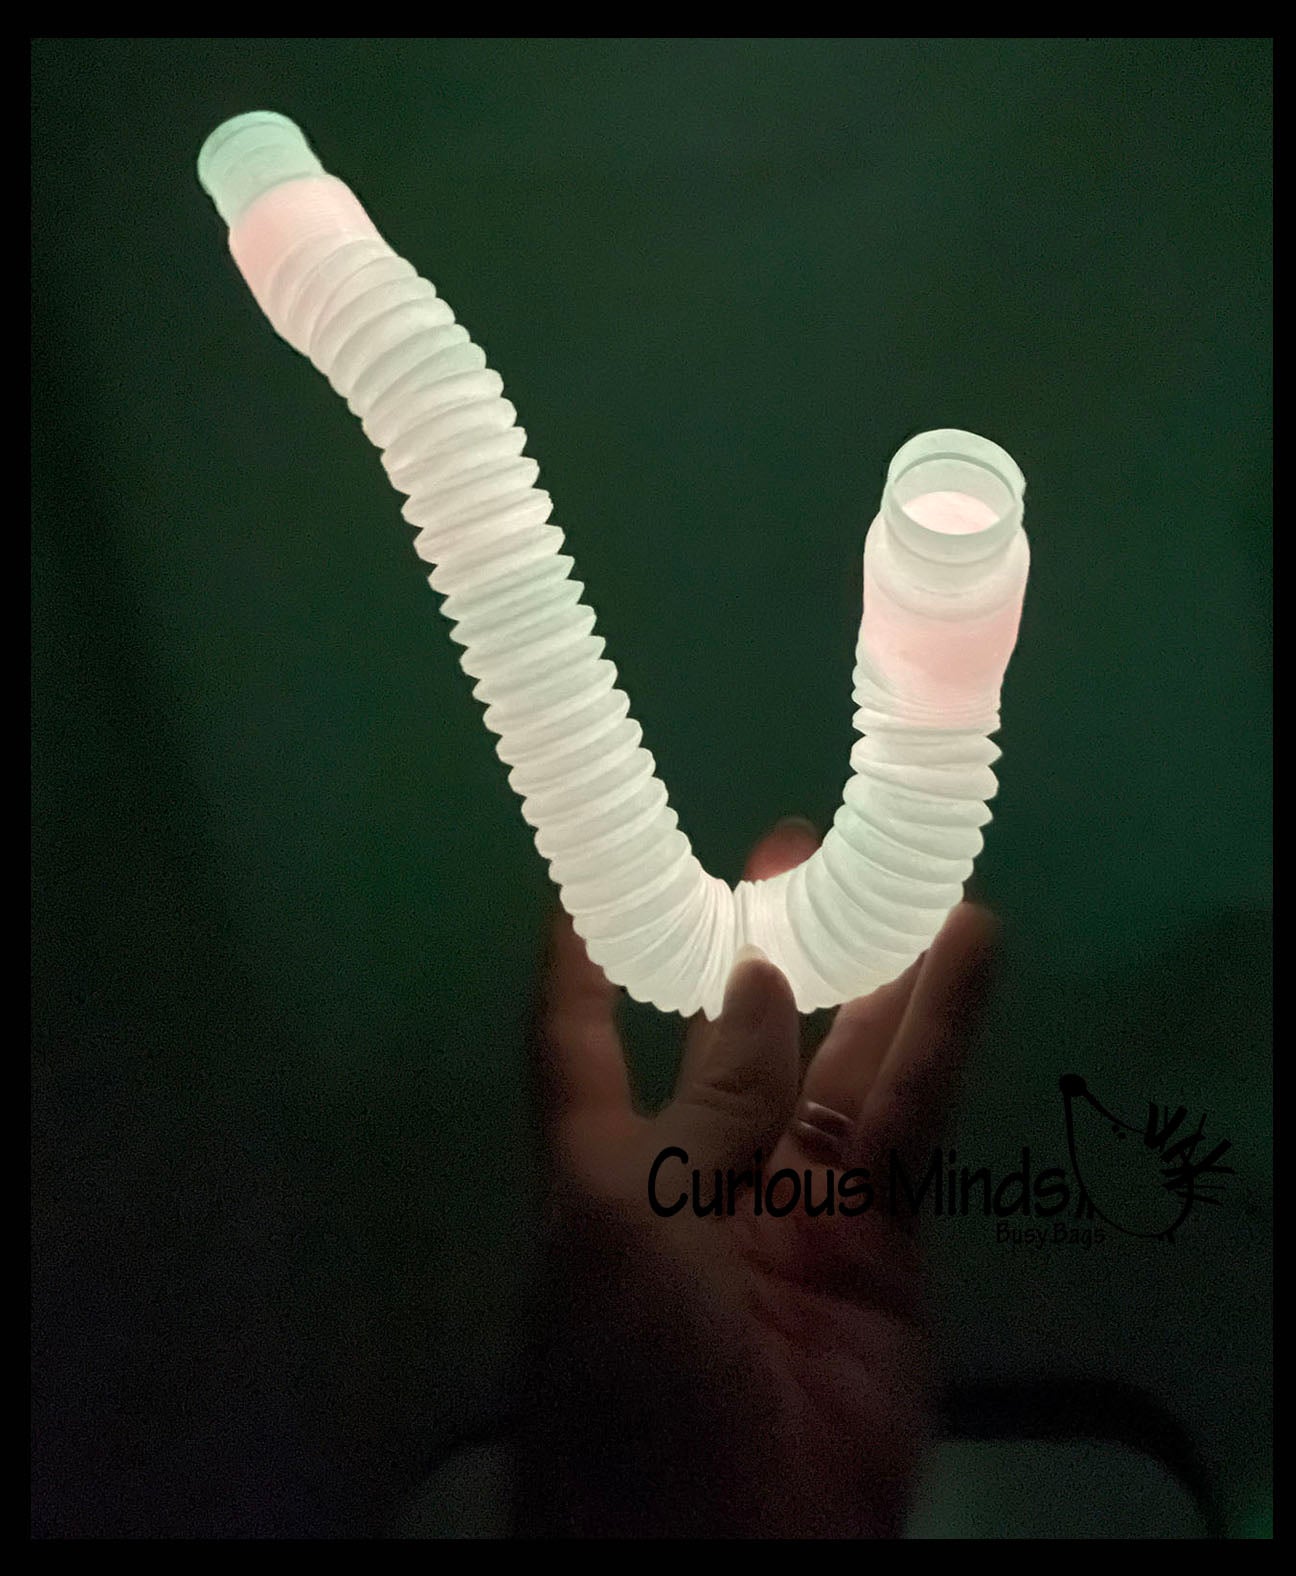 Large Glow in the Dark Pull and Pop Snap Expanding Flexible Accordion Tube Toy - Free Play - Open Ended Fidget Toy